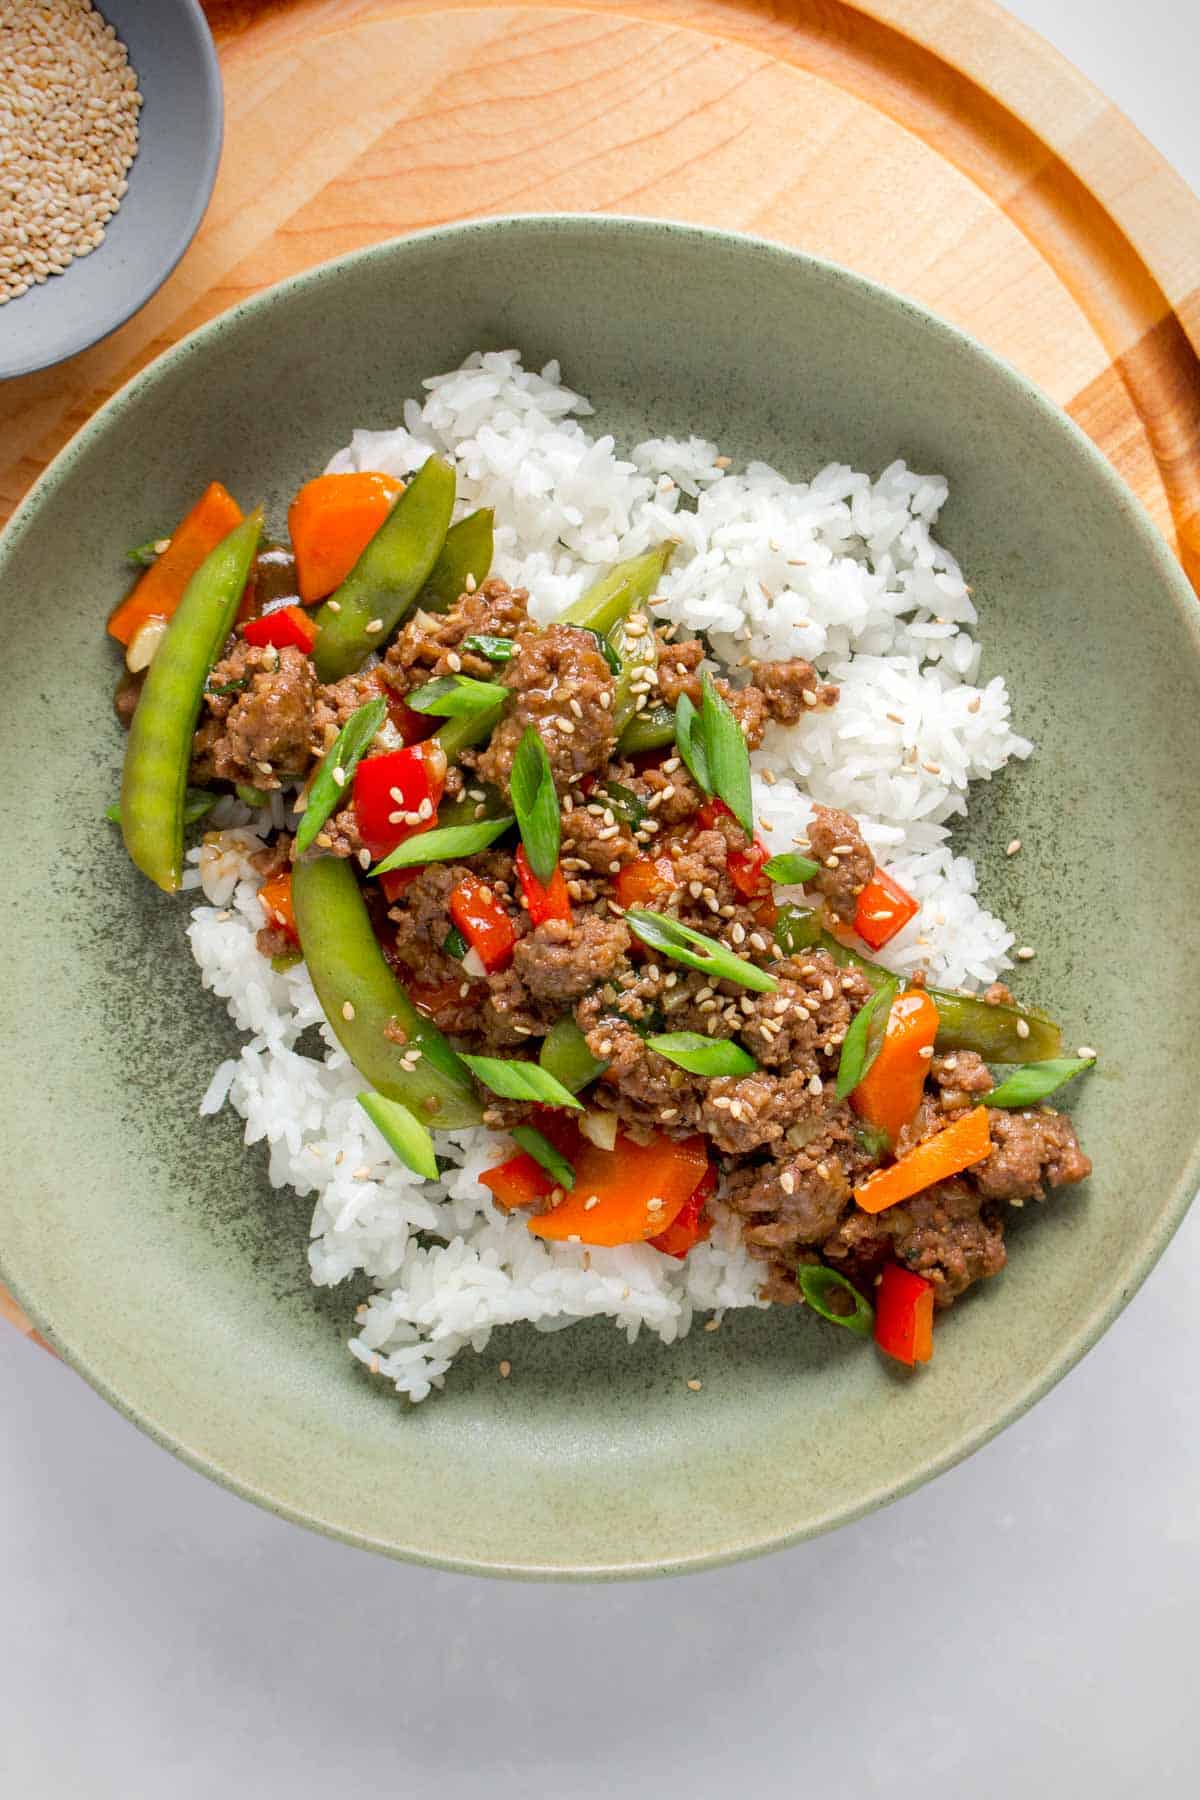 A plate of rice and beef stir fry.